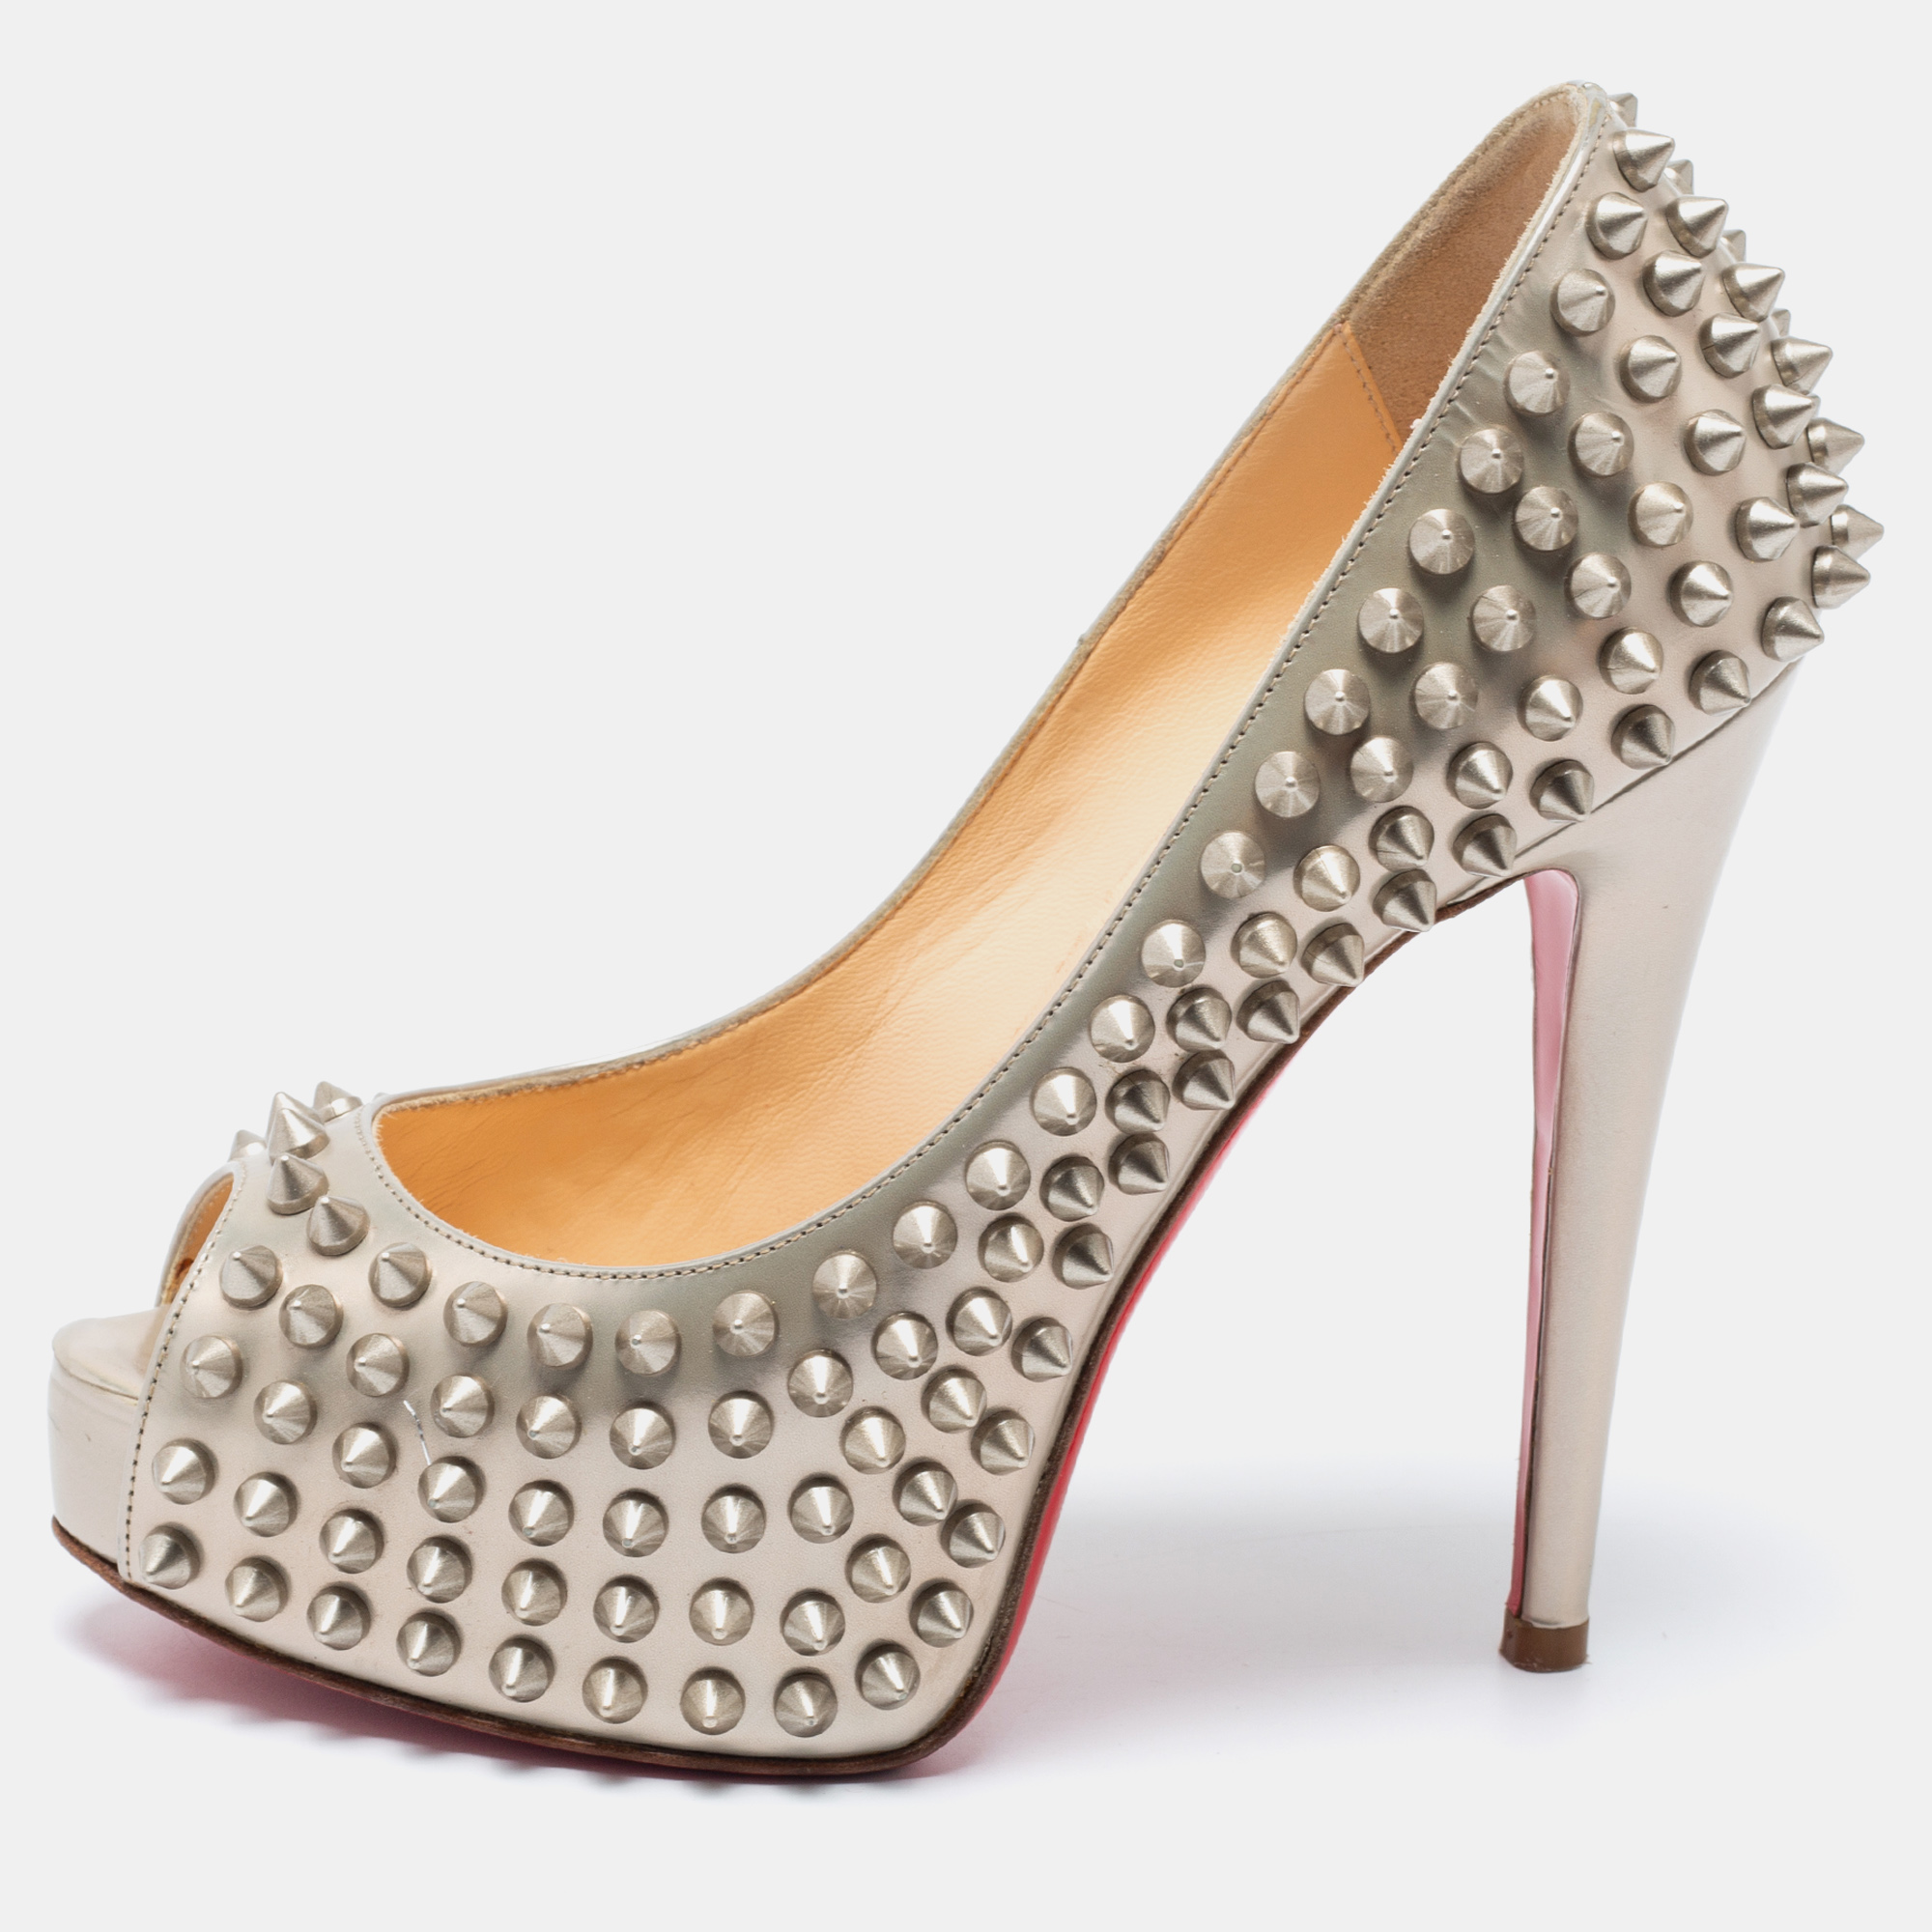 The architectural silhouette and precisely placed spikes of this pair of pumps from Christian Louboutin exemplify the brands mastery in the art of stiletto making. Finely created from leather it is detailed with 12cm heels and platforms. The signature red lacquered sole will add a signature accent to your outfit.